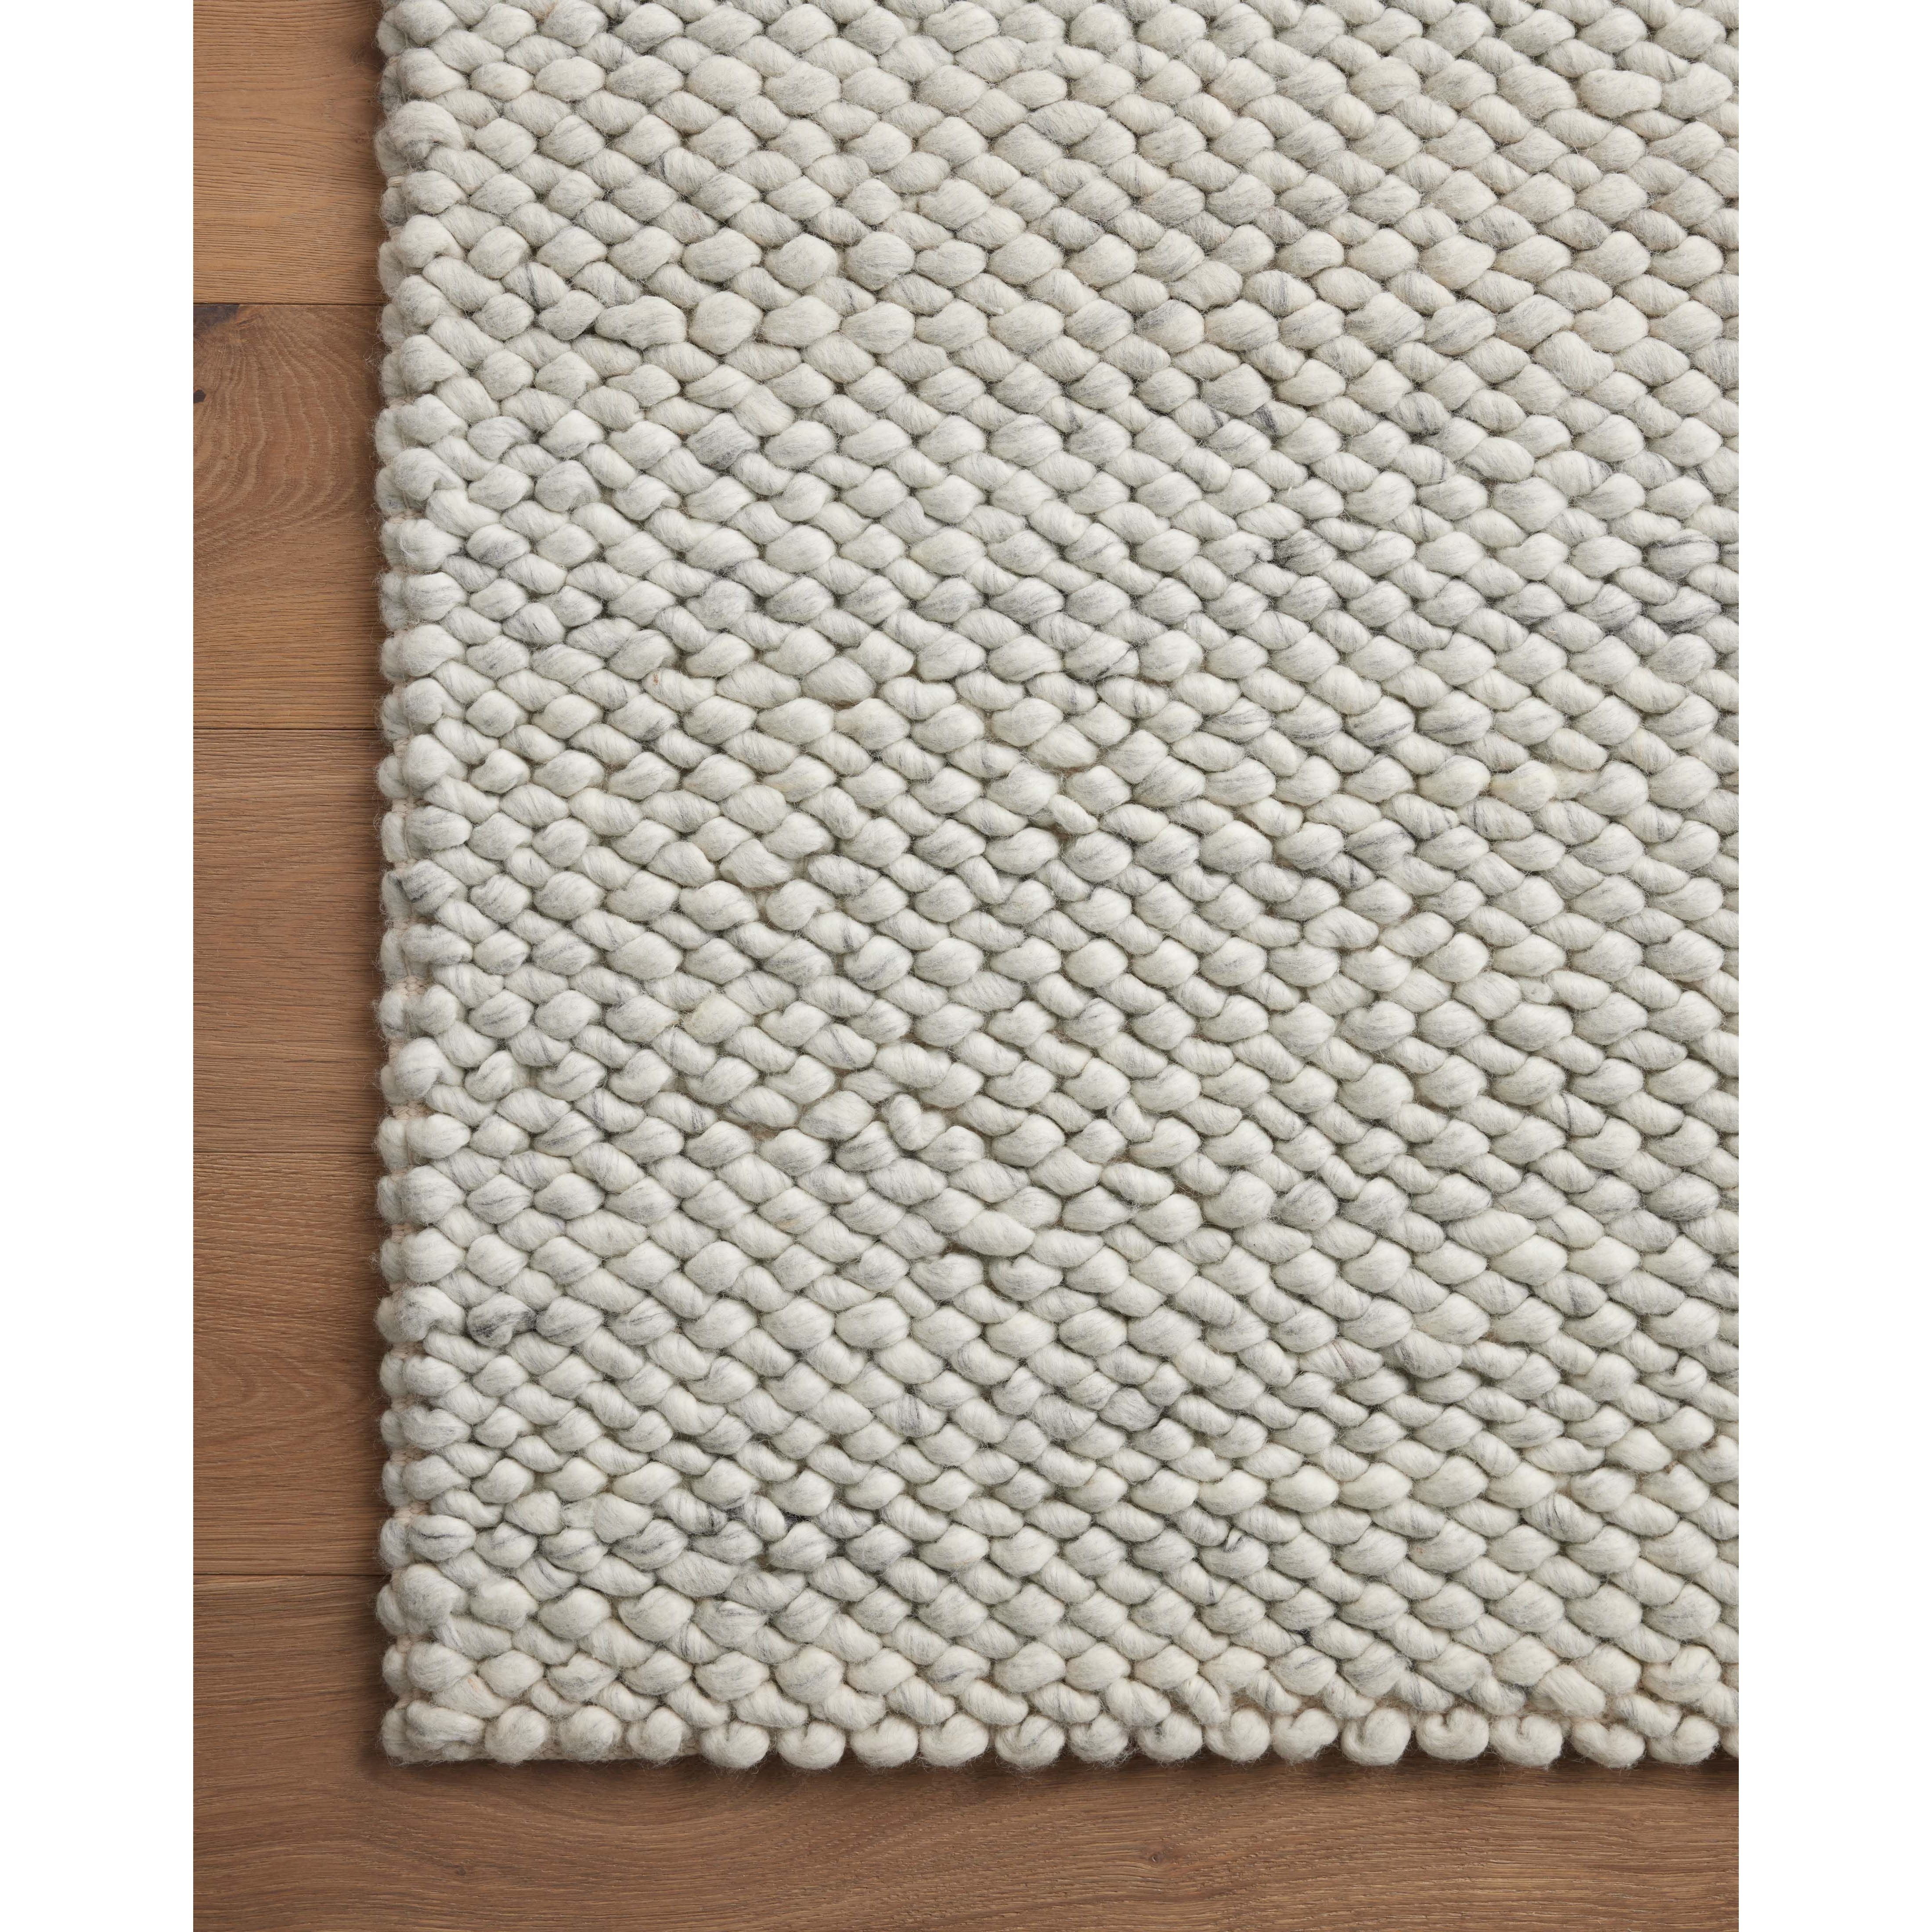 The Hendrick Ivory Rug is a beautifully textured wool area rug with an elevated ease reminiscent of a cozy handmade sweater. The rug is very plush underfoot, making it equally welcome in bedrooms and living rooms. The hand-woven weave pattern adds dimension while the rug’s color palette is soft, neutral, and serene. Amethyst Home provides interior design, new construction, custom furniture, and area rugs in the Seattle metro area.